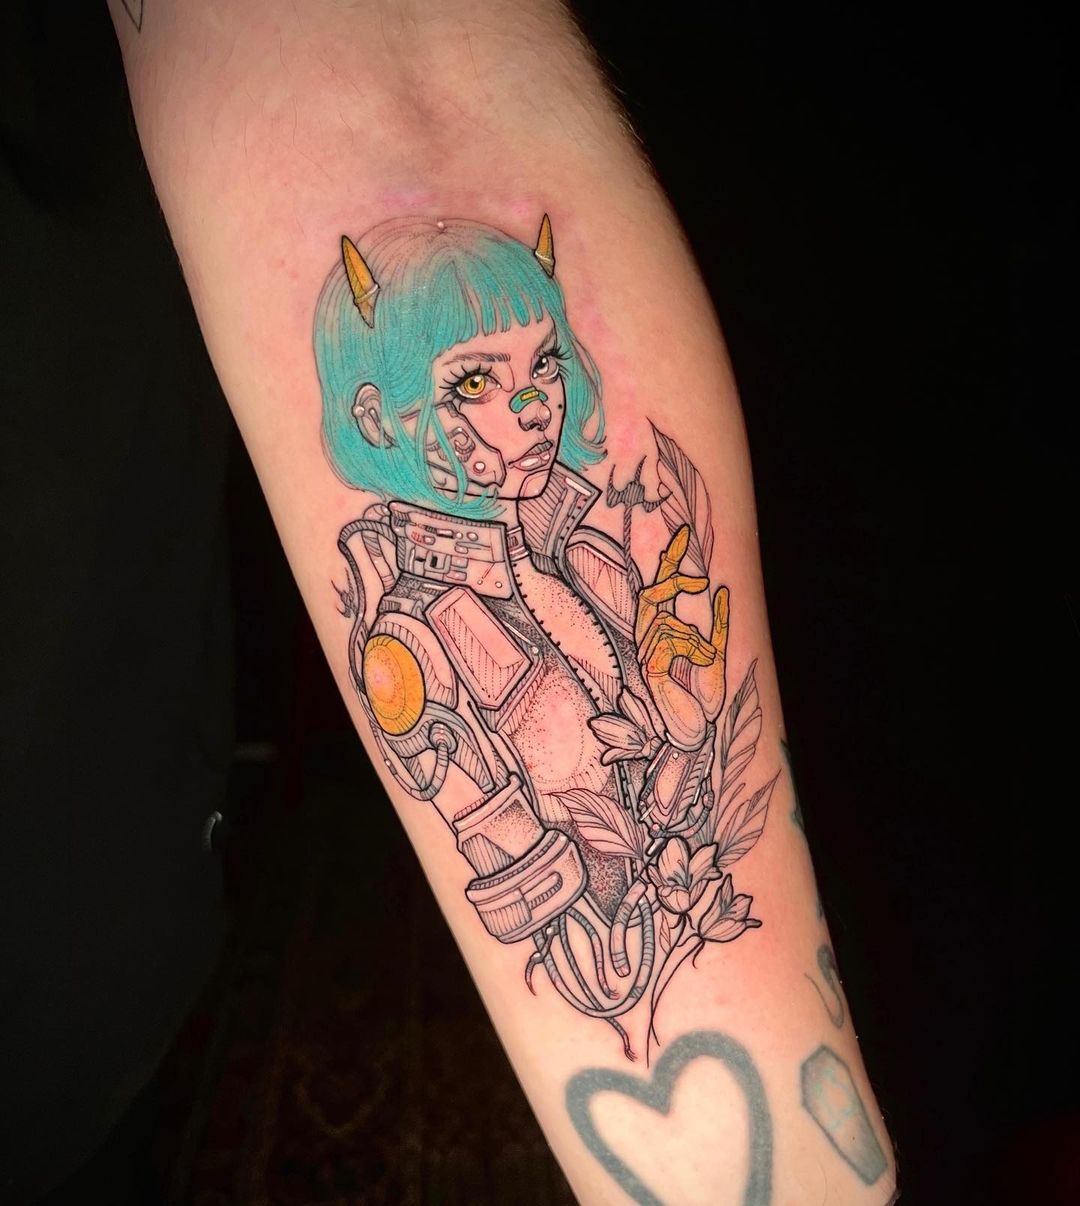 A Lady In Mechanical Suit With Flowers Cyberpunk Tattoo